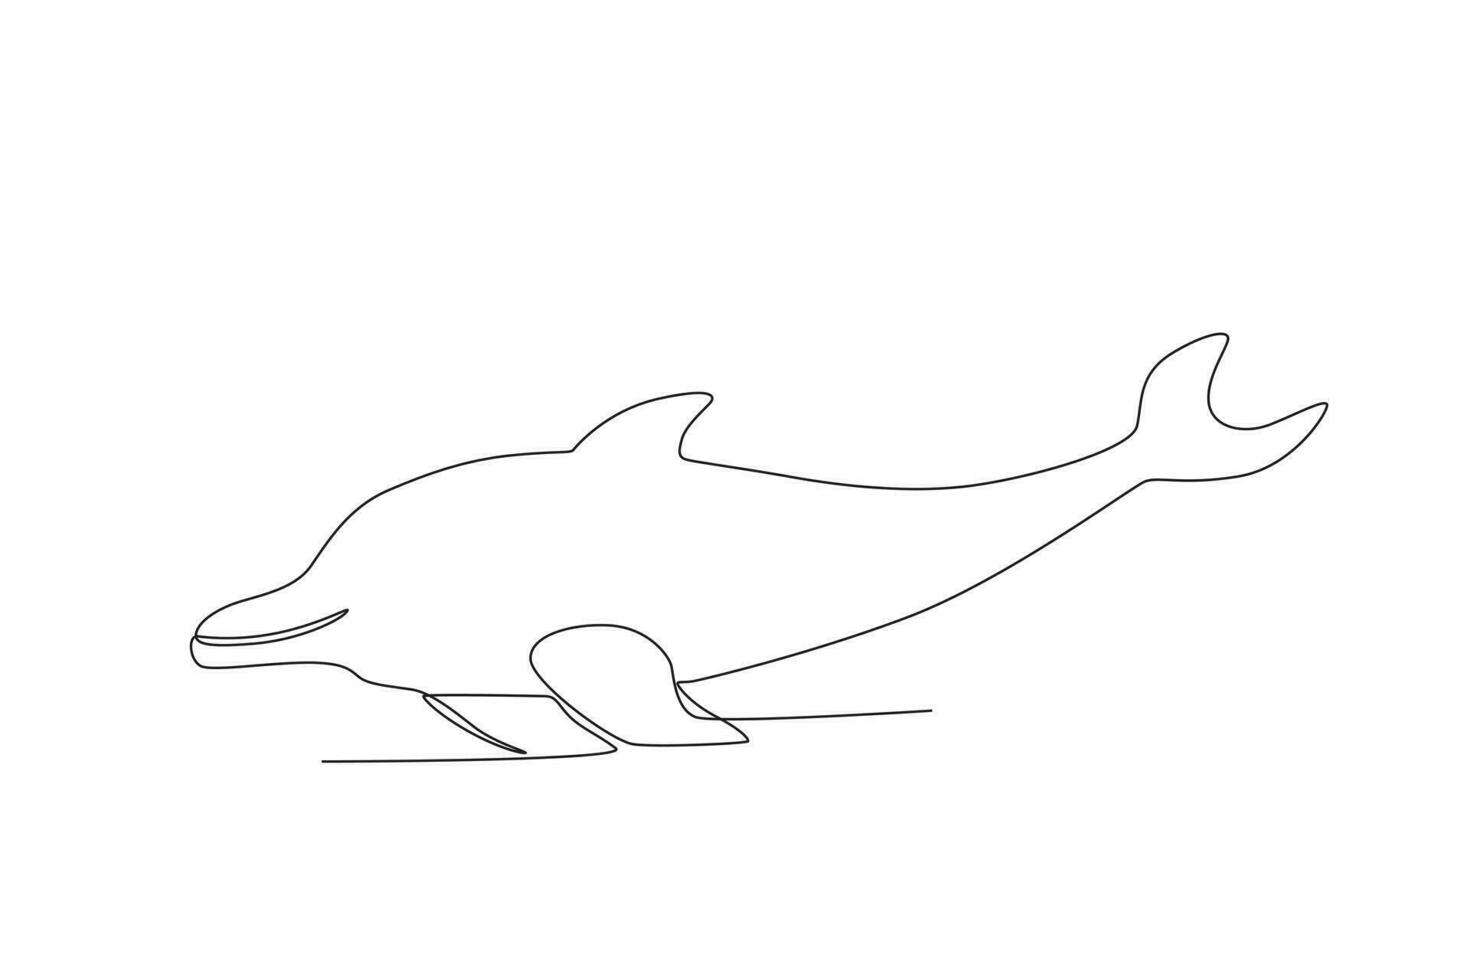 Single one line drawing of a dolphin. Continuous line draw design graphic vector illustration.